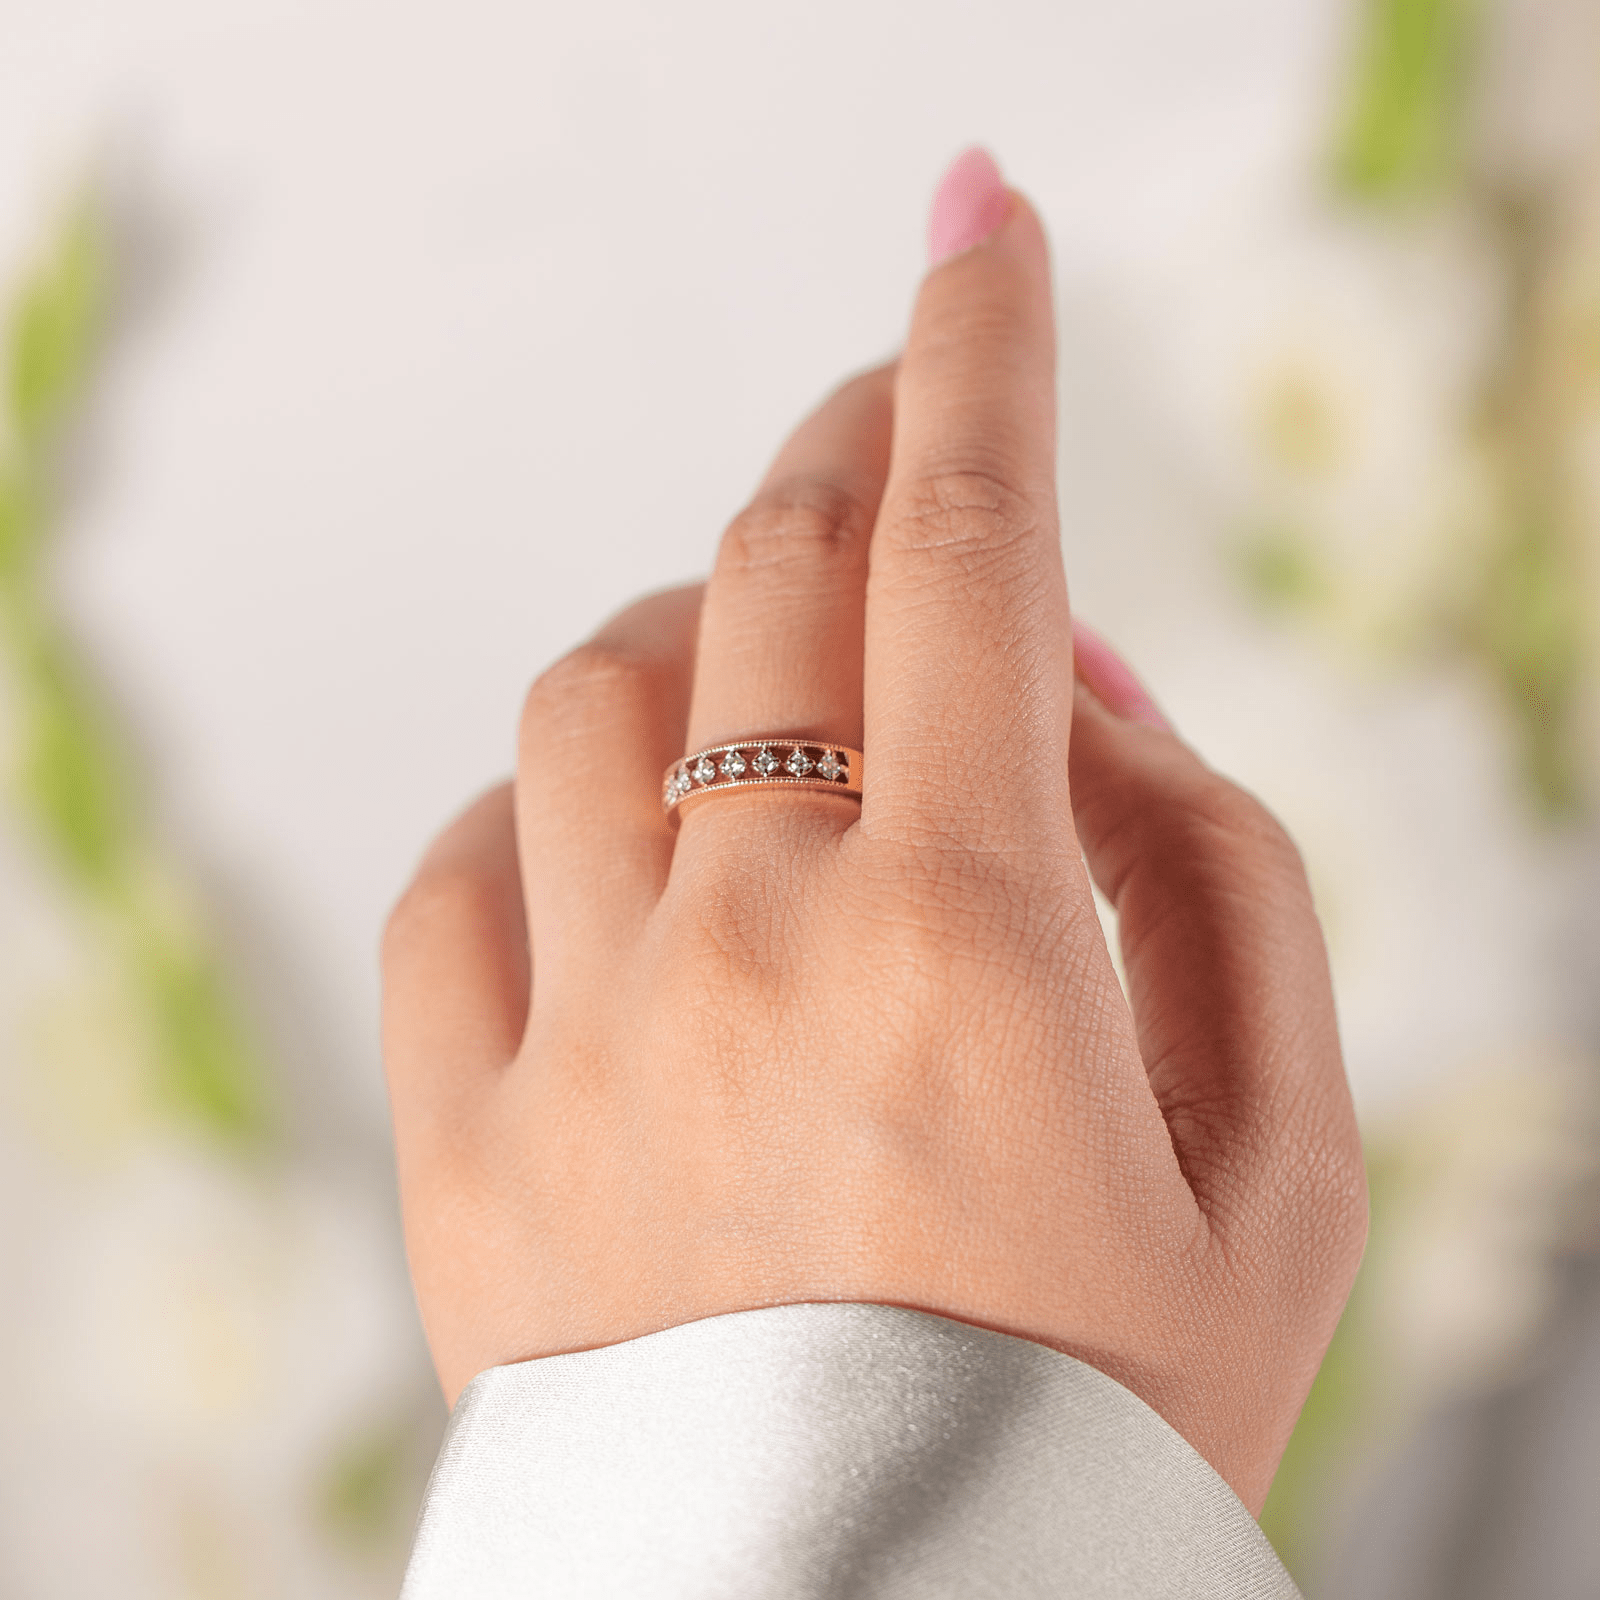 Everything You Need to Know About Gold Rings for Women - The Caratlane